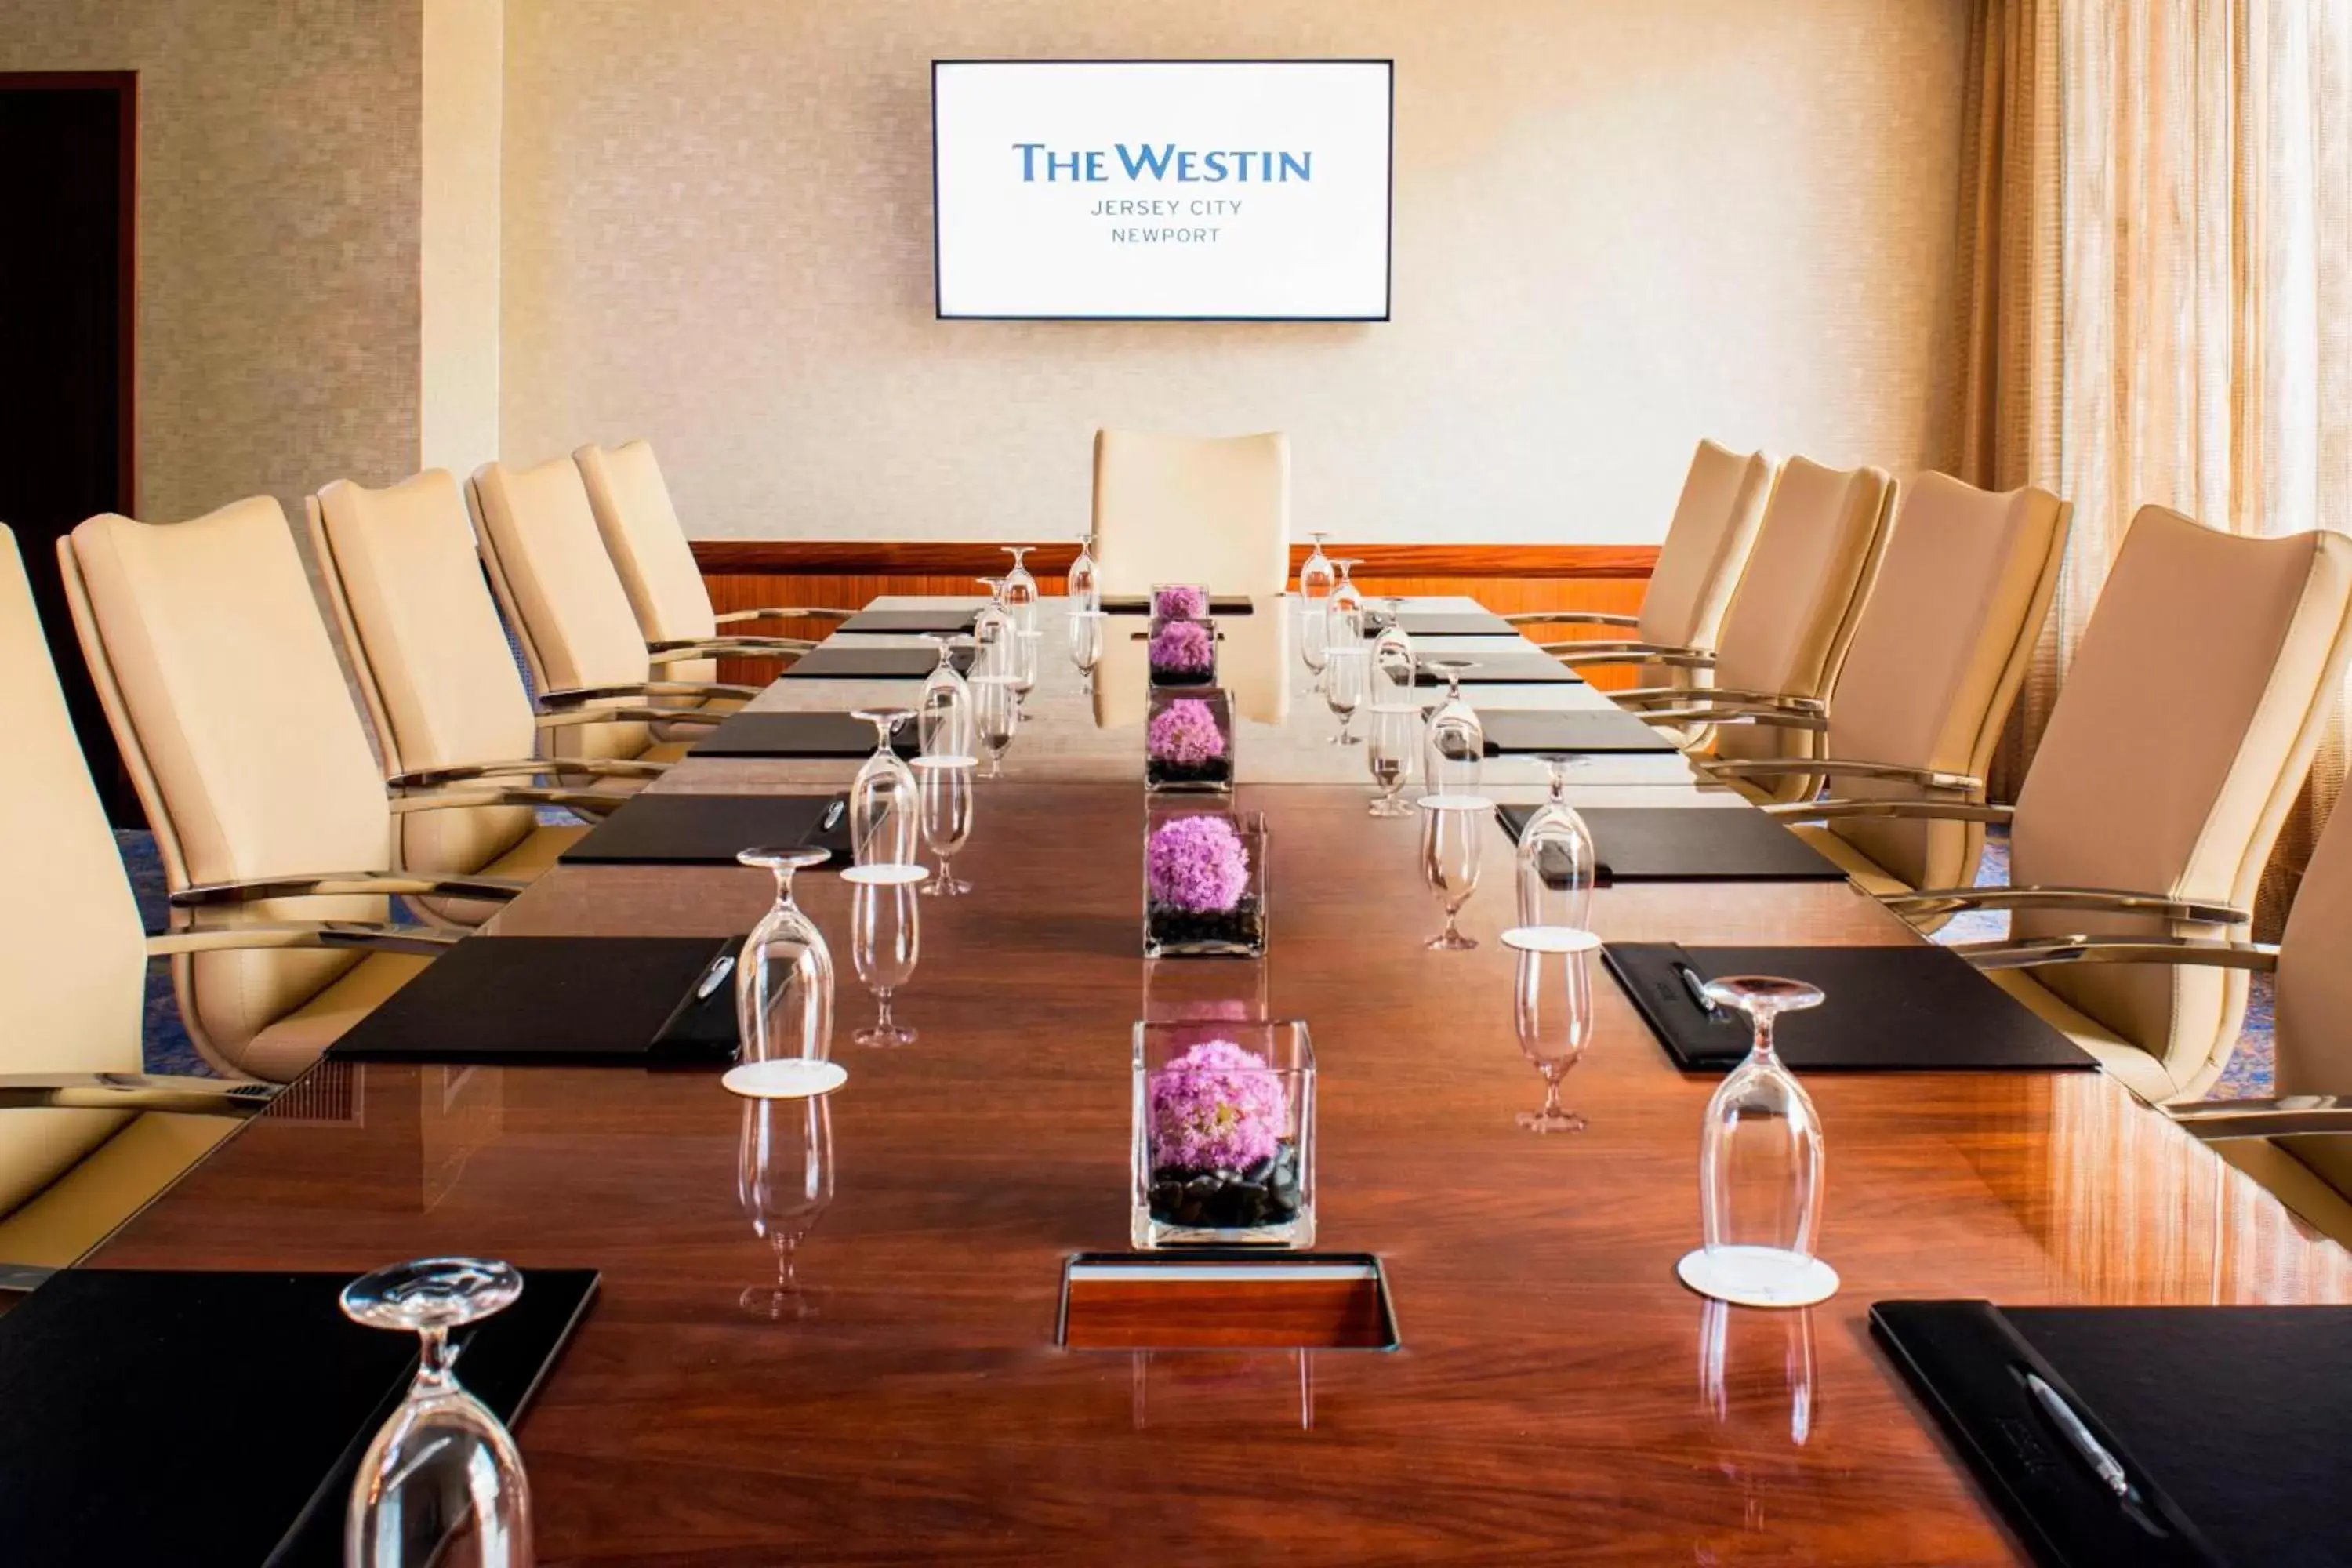 Meeting/conference room, Business Area/Conference Room in The Westin Jersey City Newport